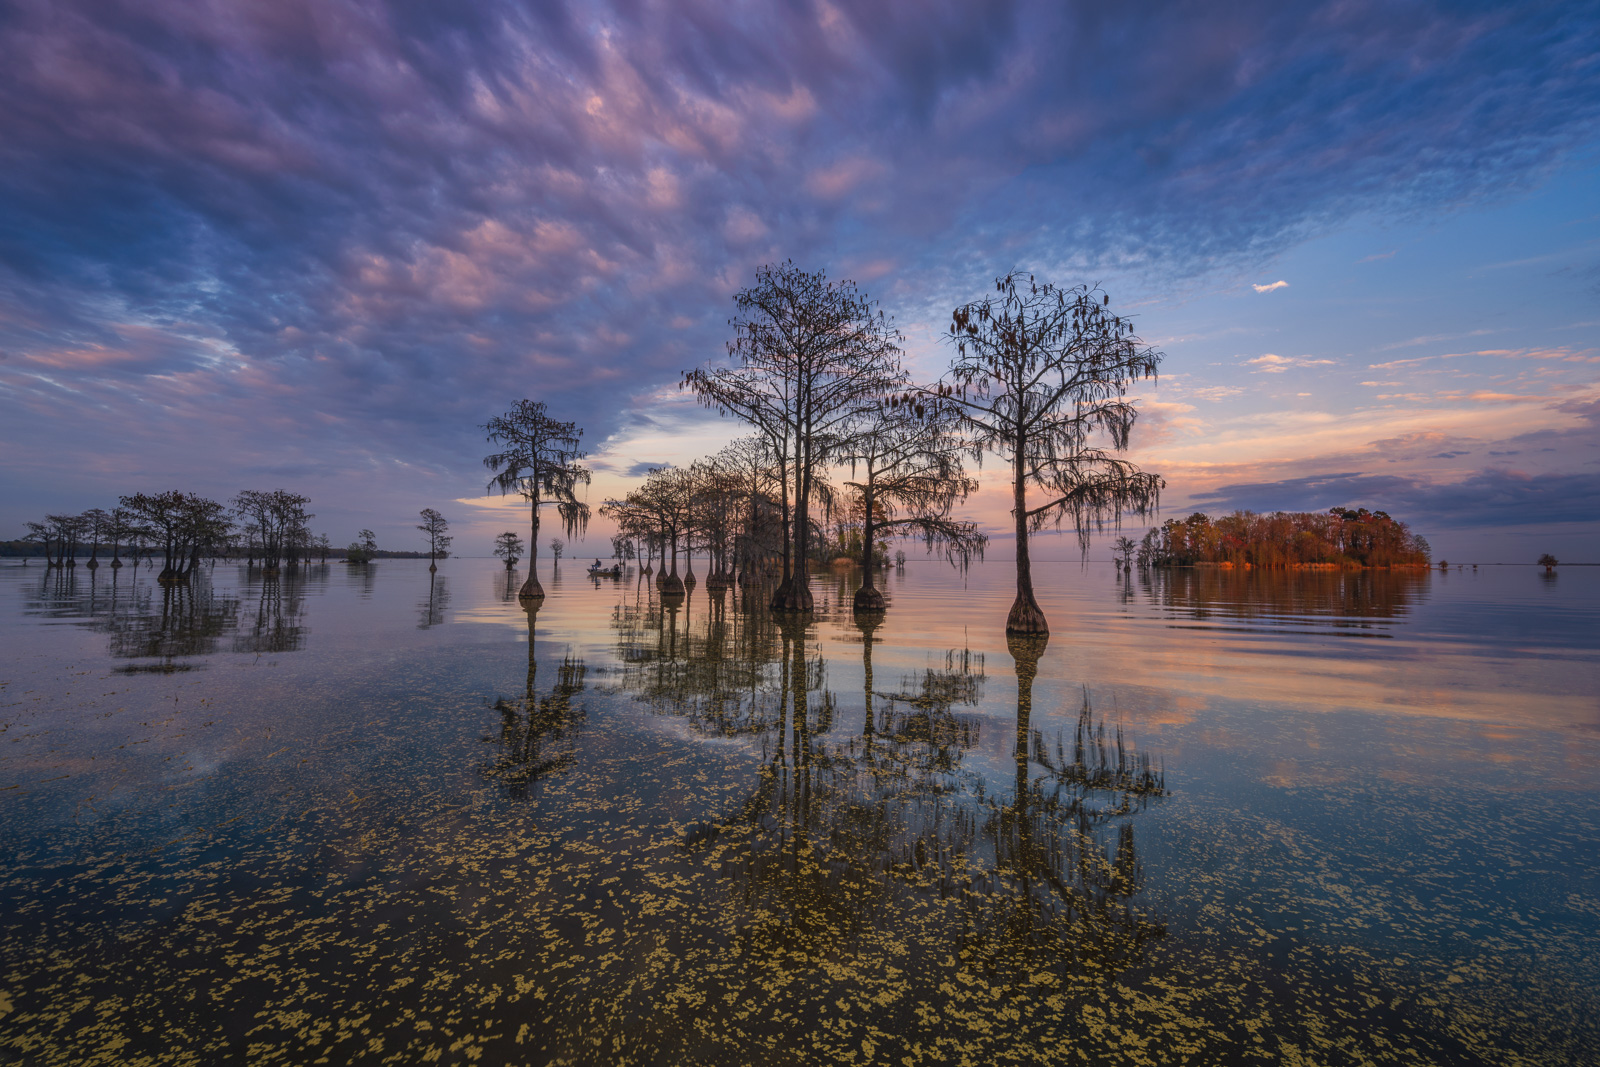 Bald Cypress Trees reflecting in the calm waters of Lake Moultrie at sunset.